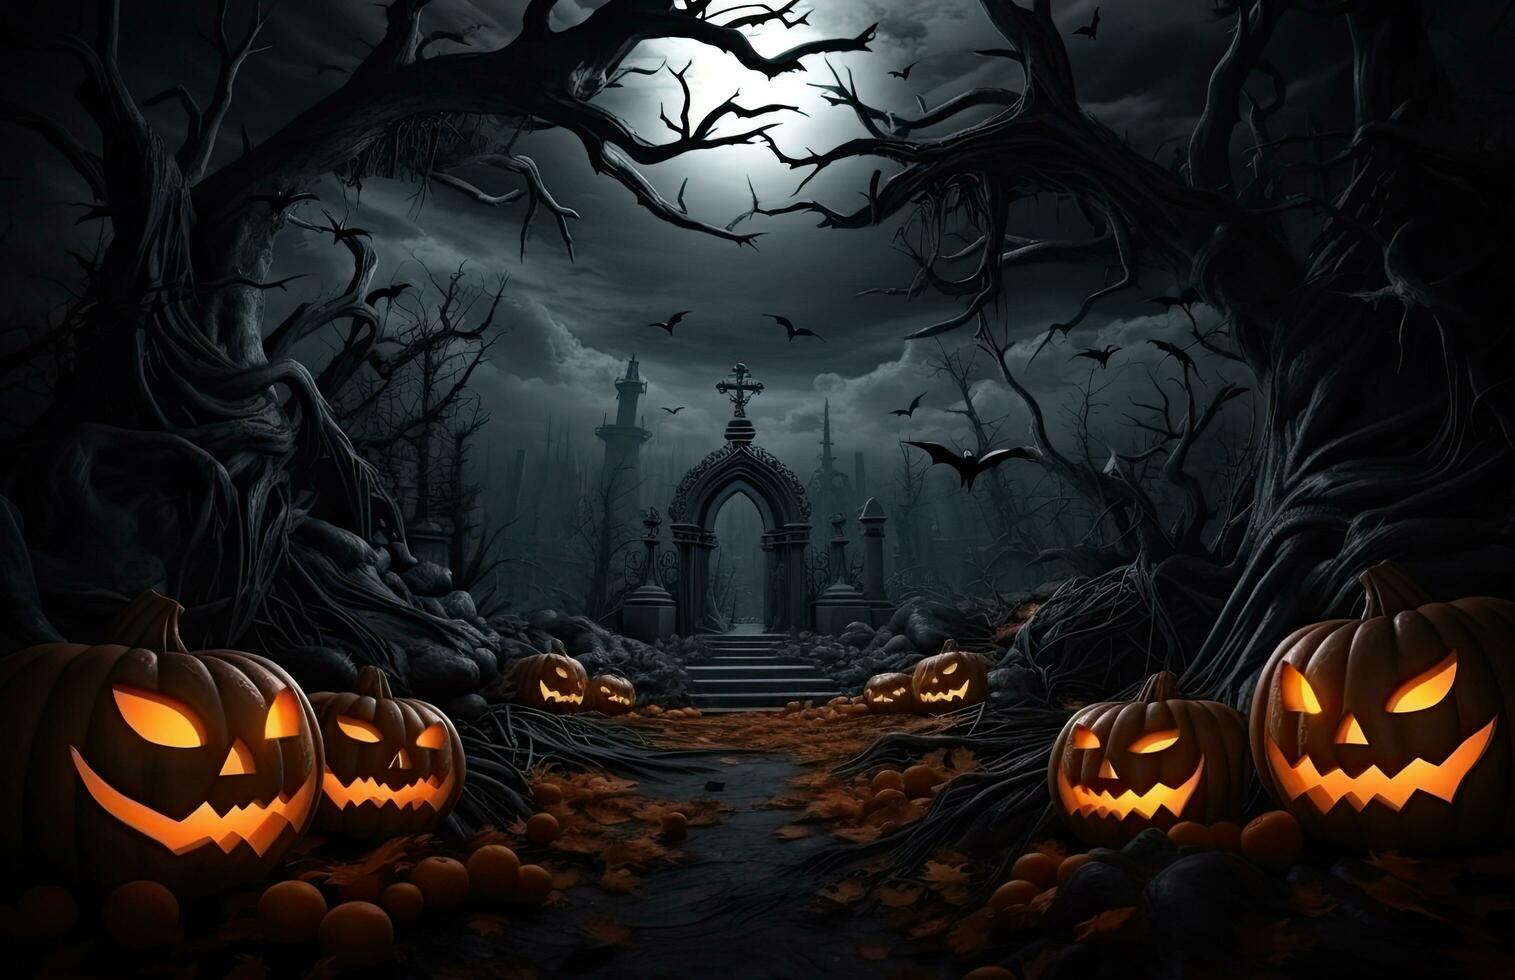 Spooky background for Halloween with twisted trees, Jack o lanterns and bats flying in the sky photo